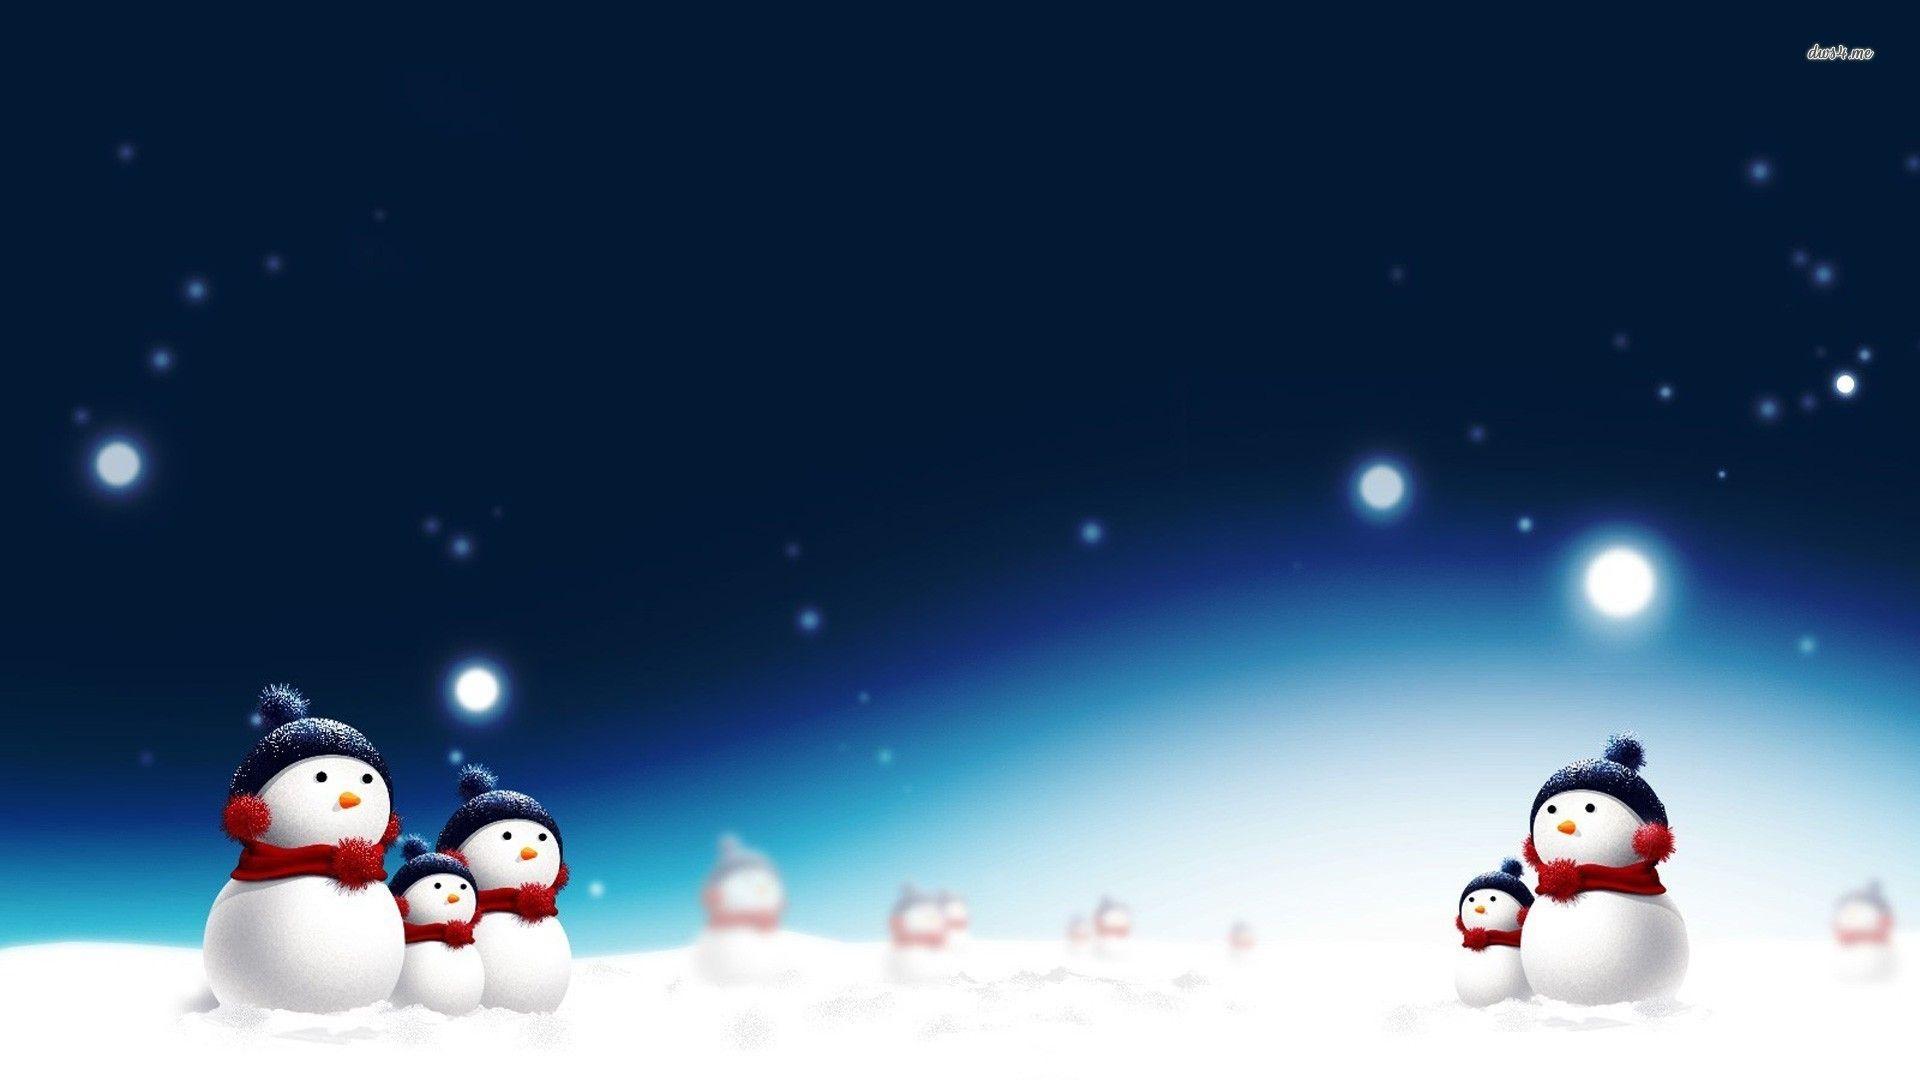 Free Holiday Wallpapers - Wallpaper Cave